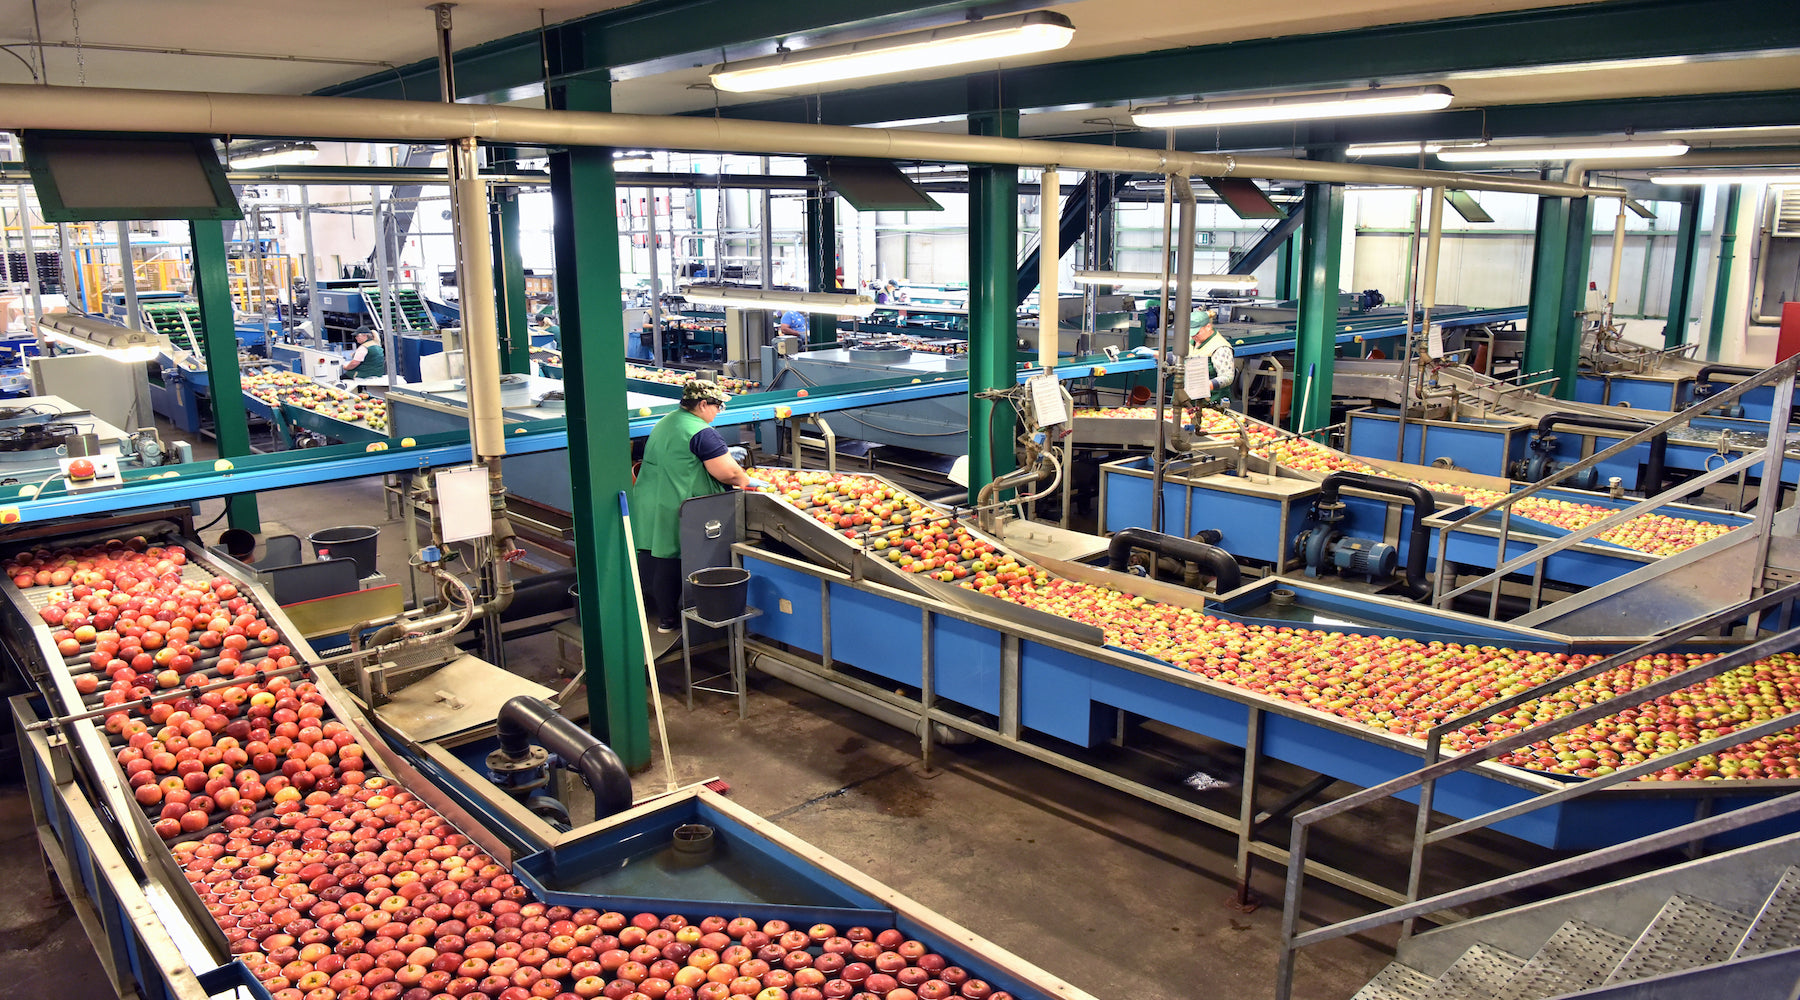 Food processing lighting installed in food factory with harvested apples